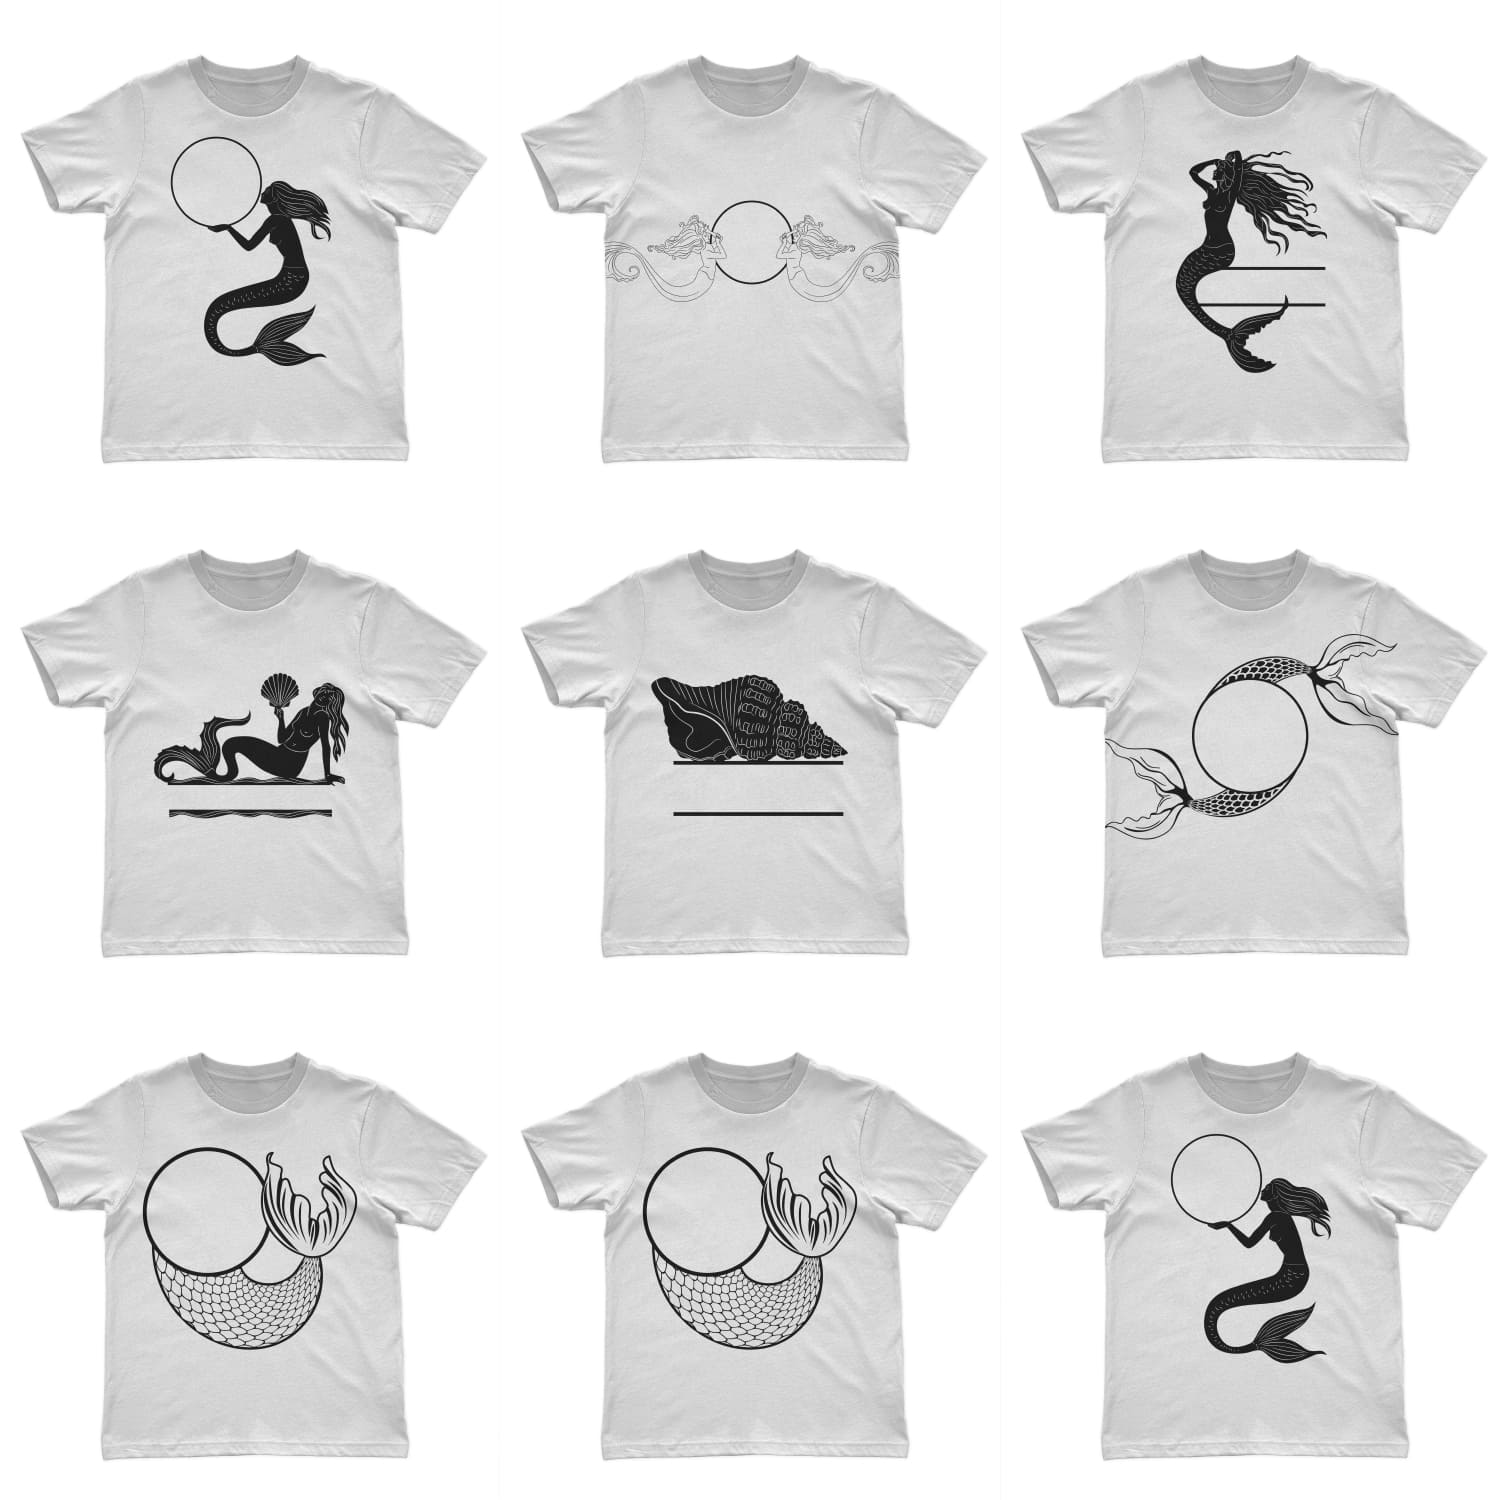 Beautiful images on various t-shirts with mermaids.